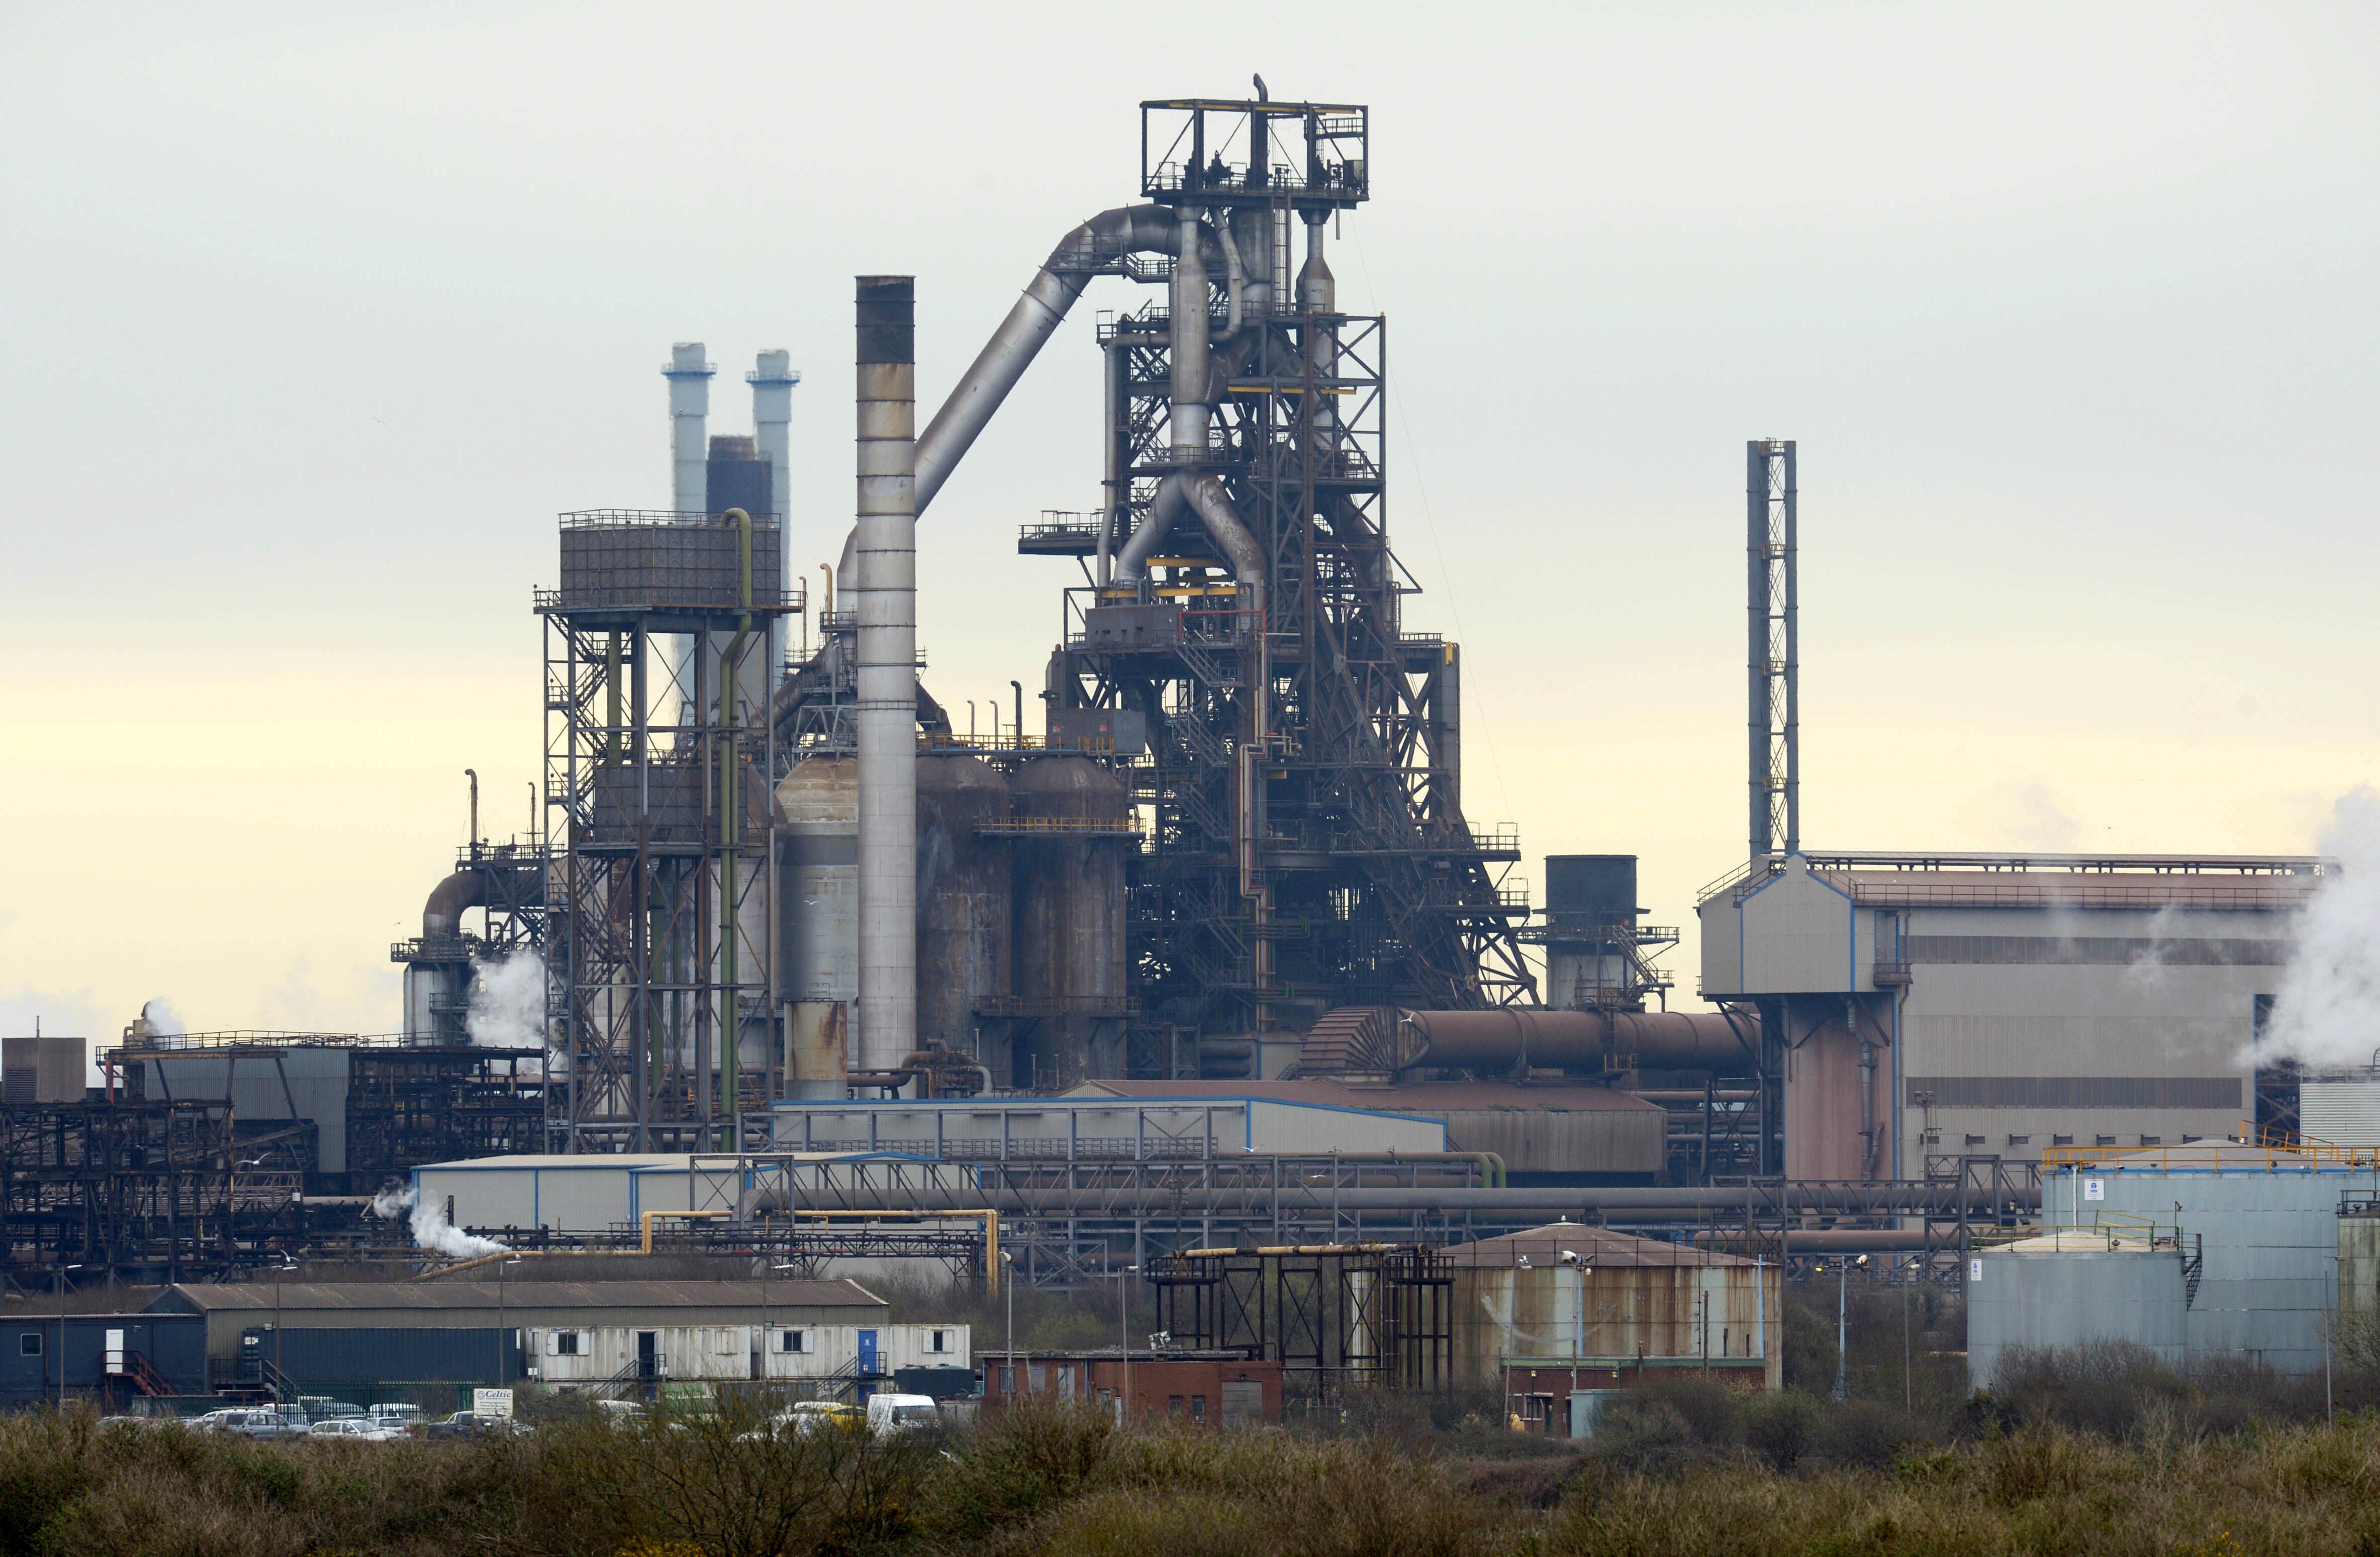 Still No Resolution To Tata Steel's UK Woes - Forbes India